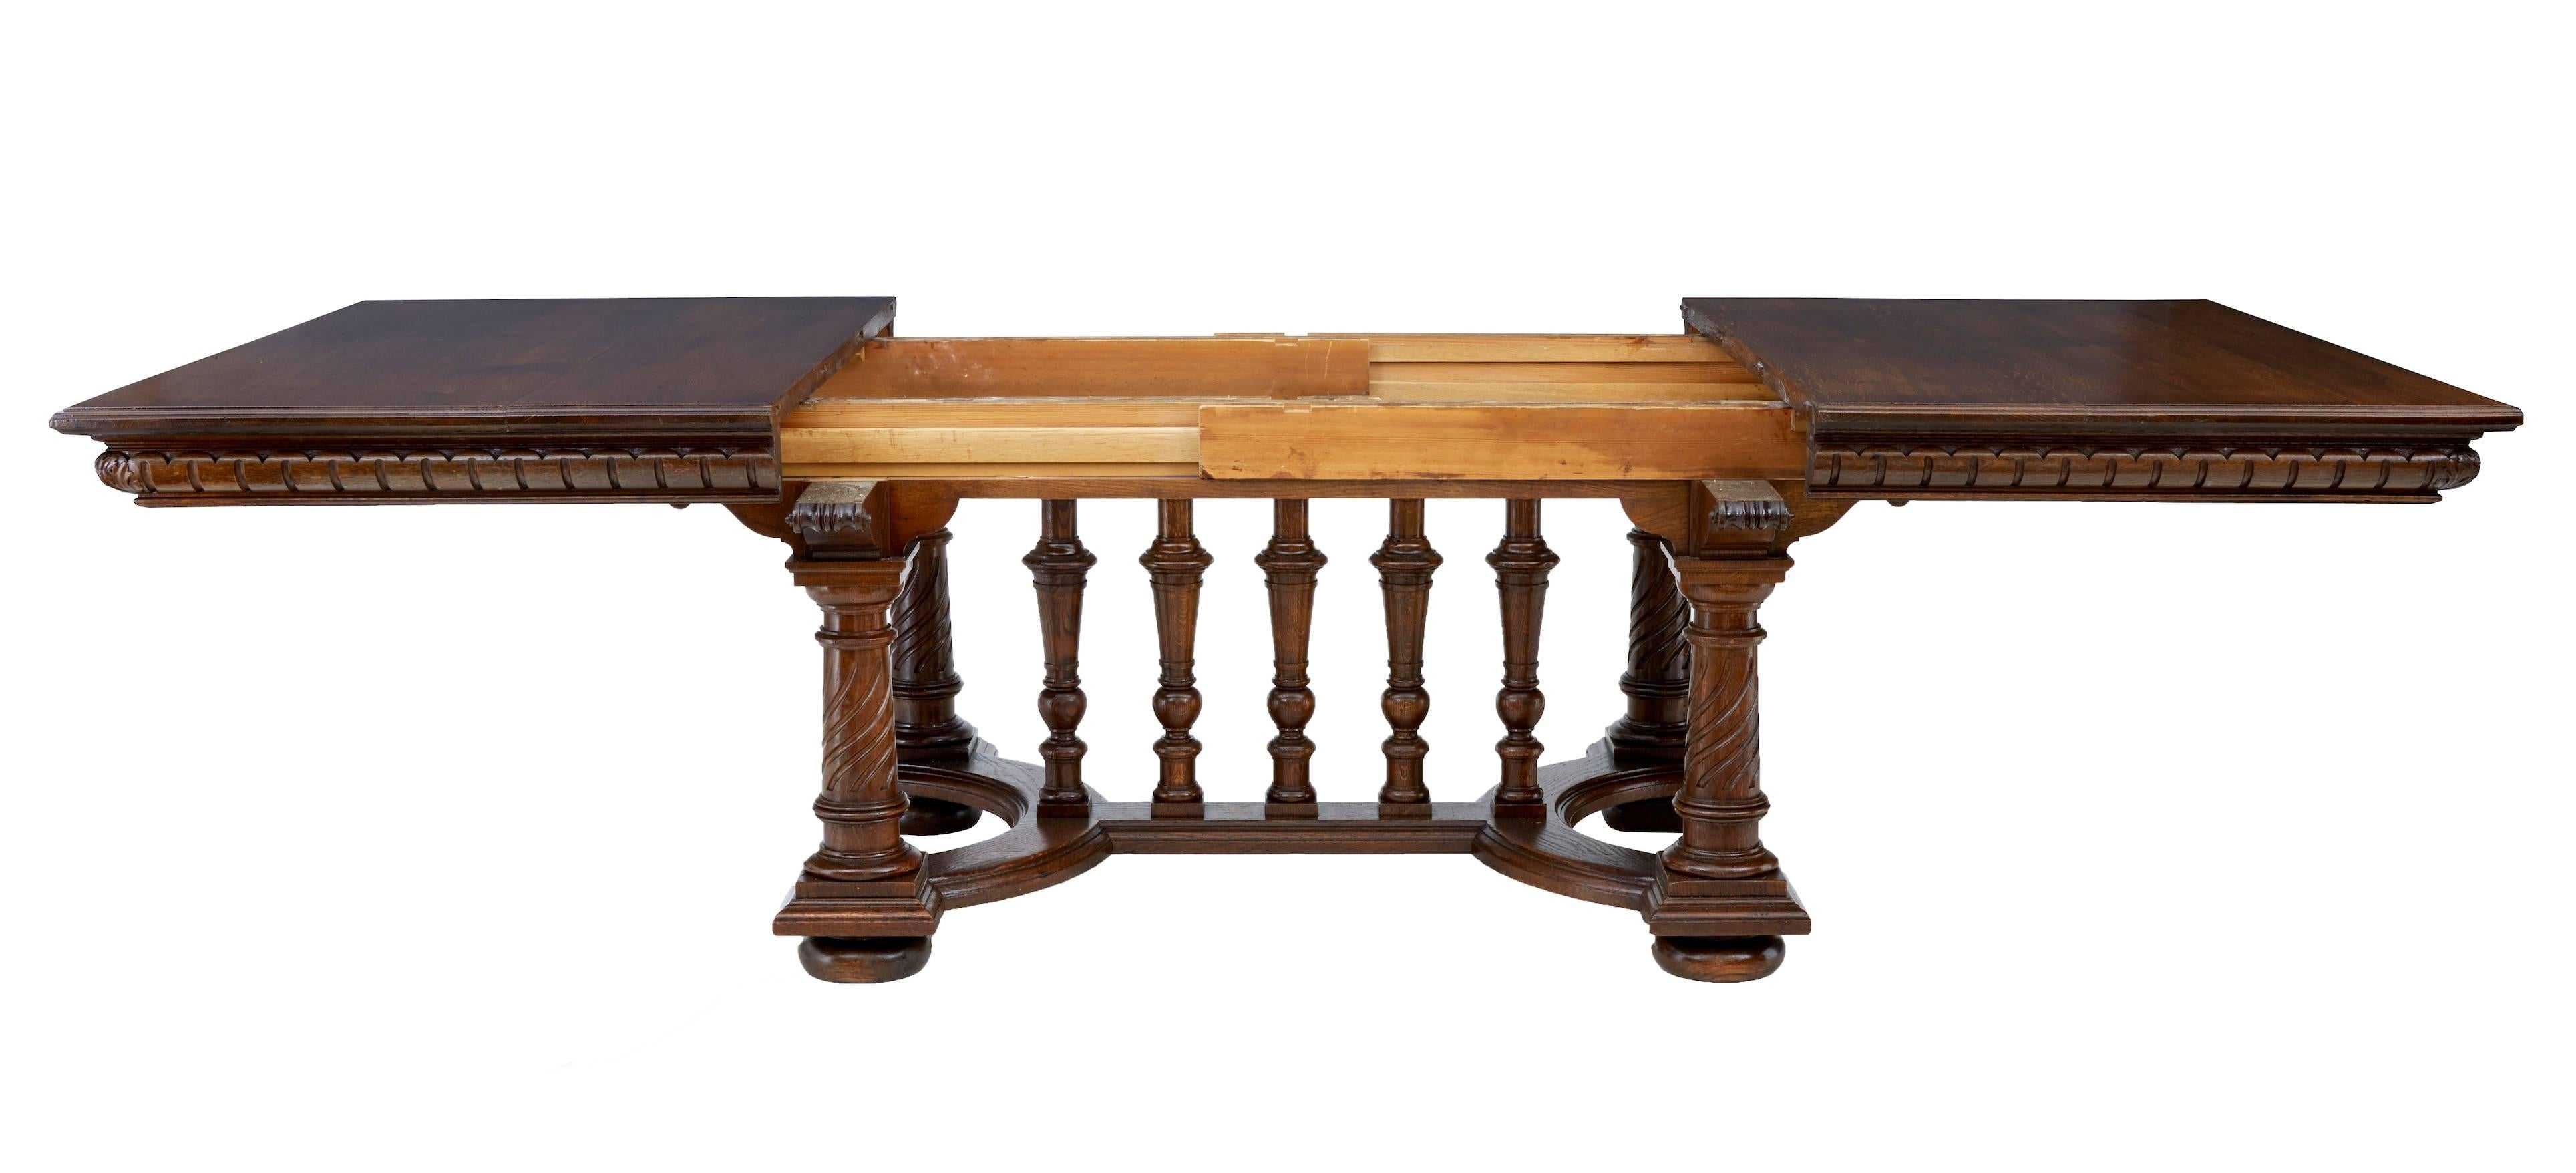 Large oak extending dining table that seats a comfortable 12, circa 1880.
Oak base and top with two additional pine leaves.
Oak top stands on four turned legs with candy twist detail. Horseshoe stretchers with five turned column